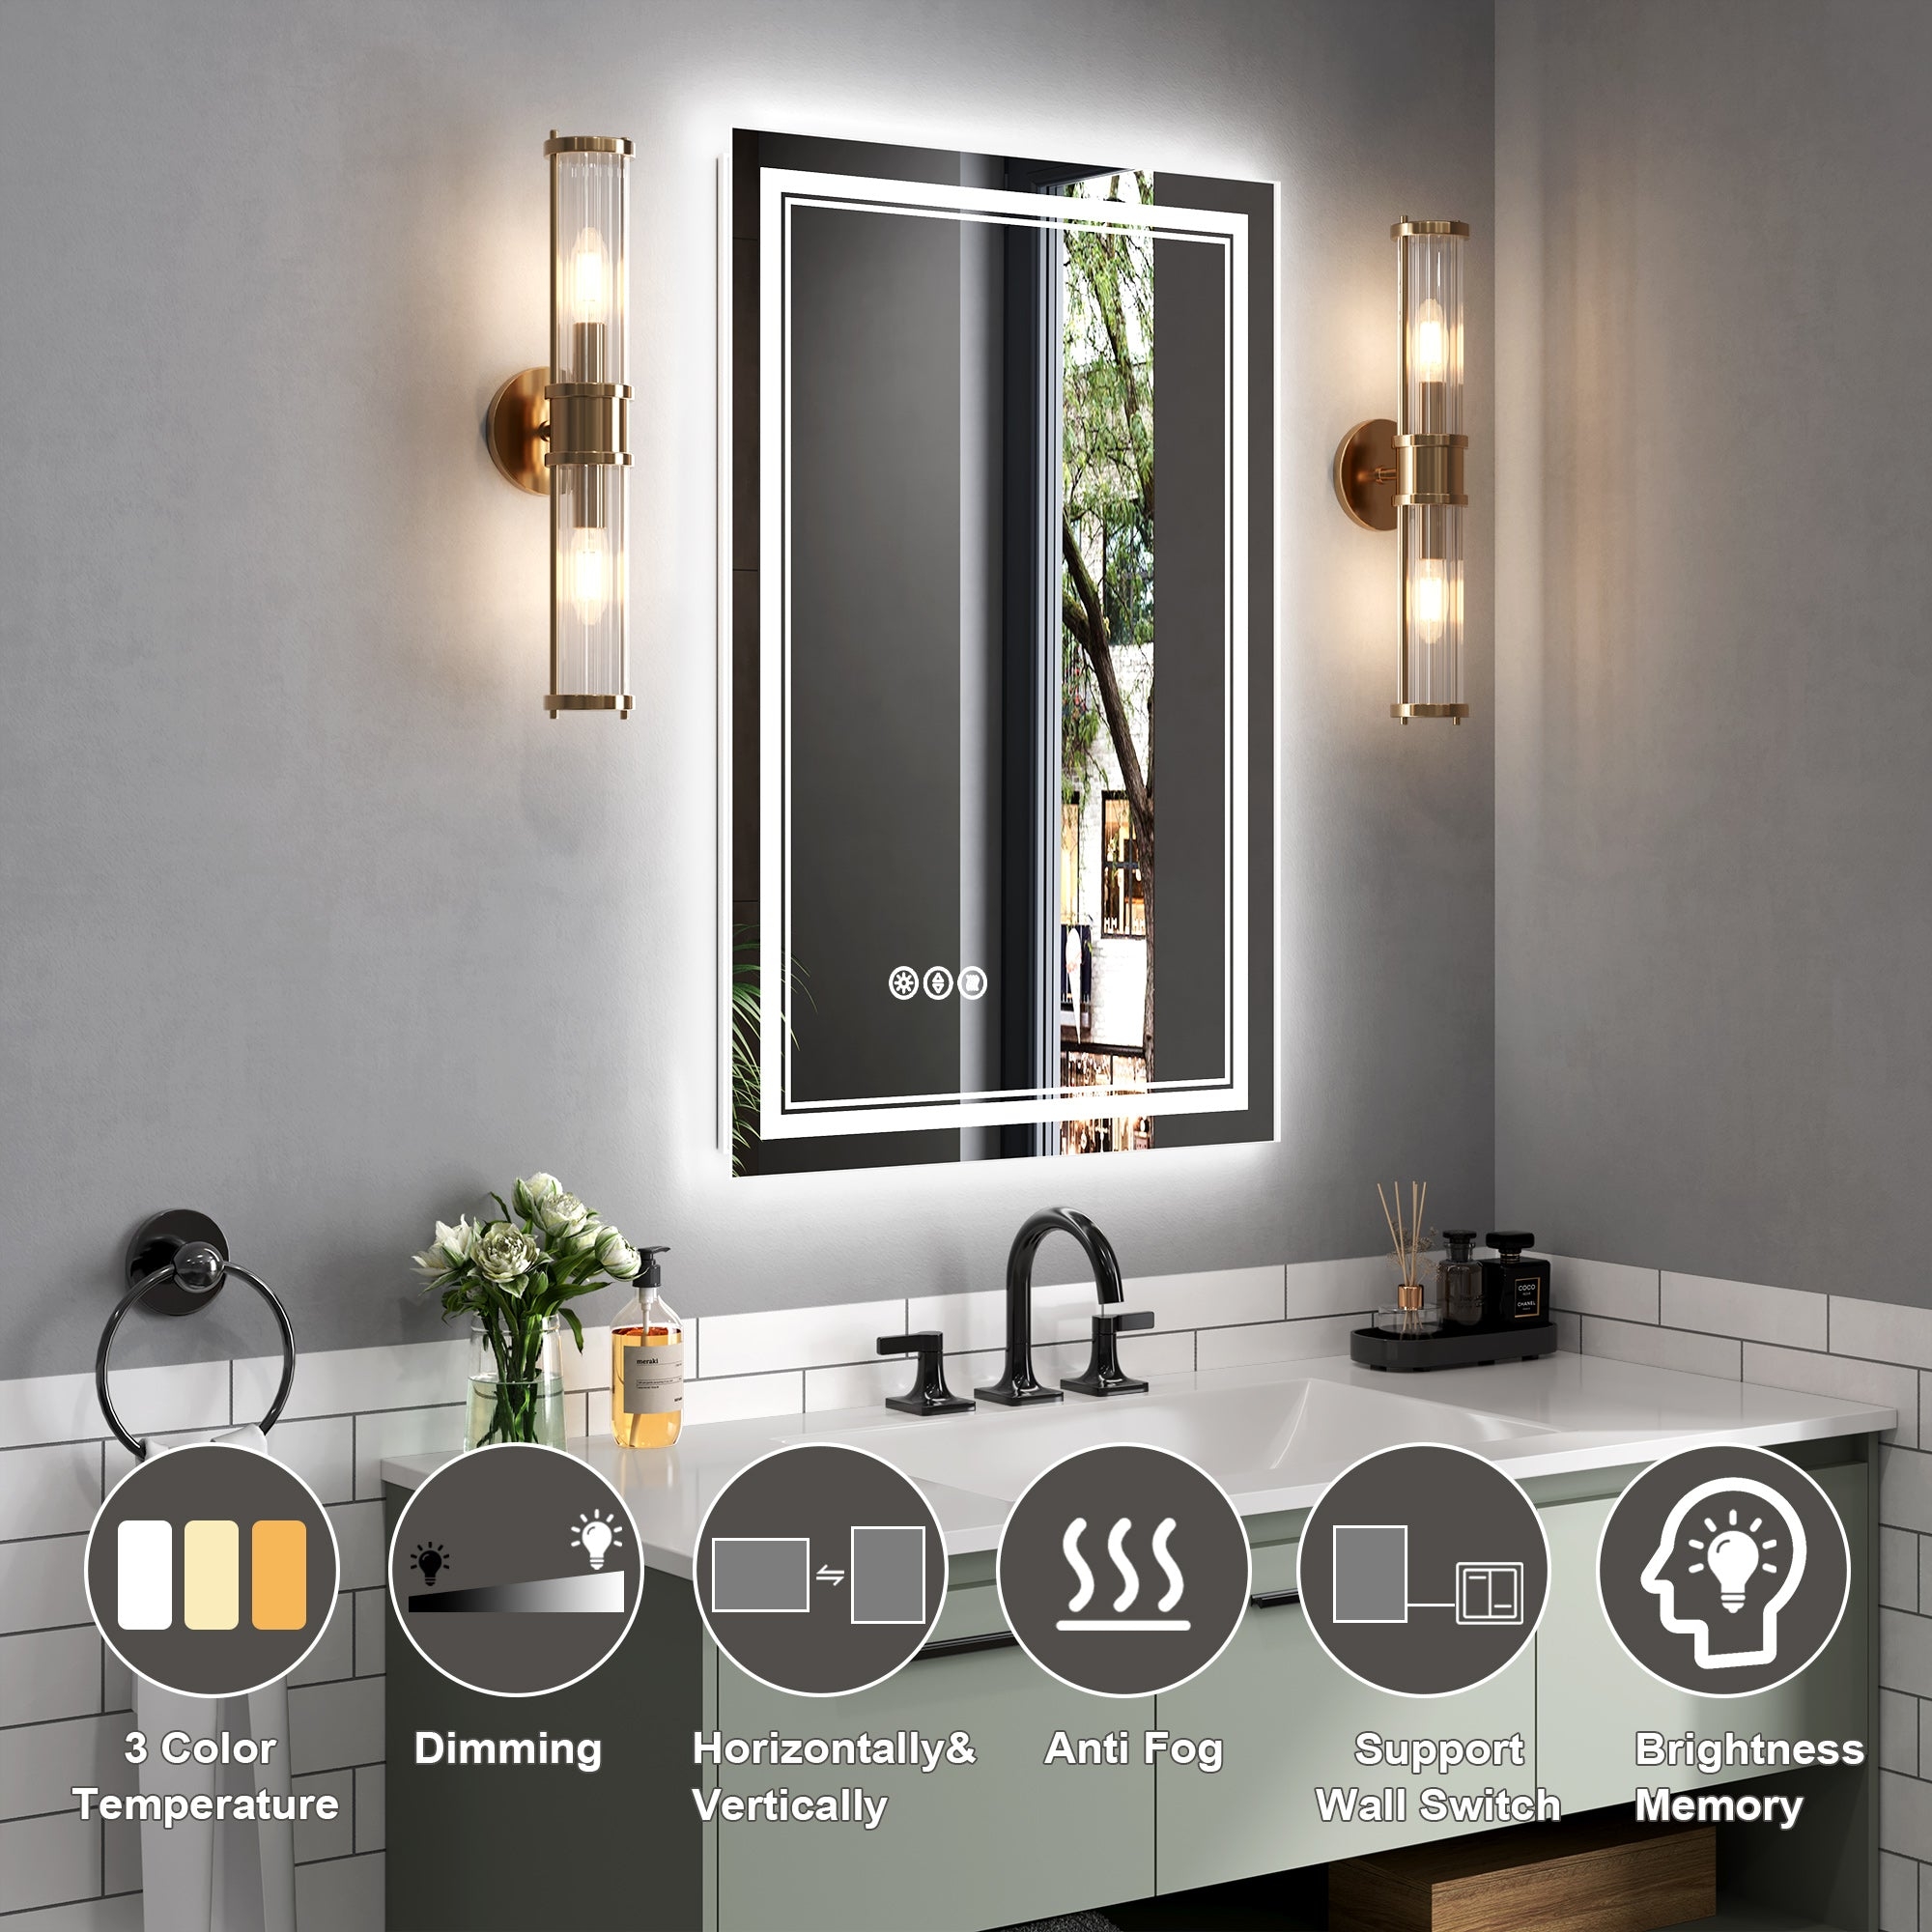 Linea 20 W X 28 H LED Heated Bathroom Mirror,Anti Fog,Dimmable,Front-Lighted And Backlit, Tempered Glass